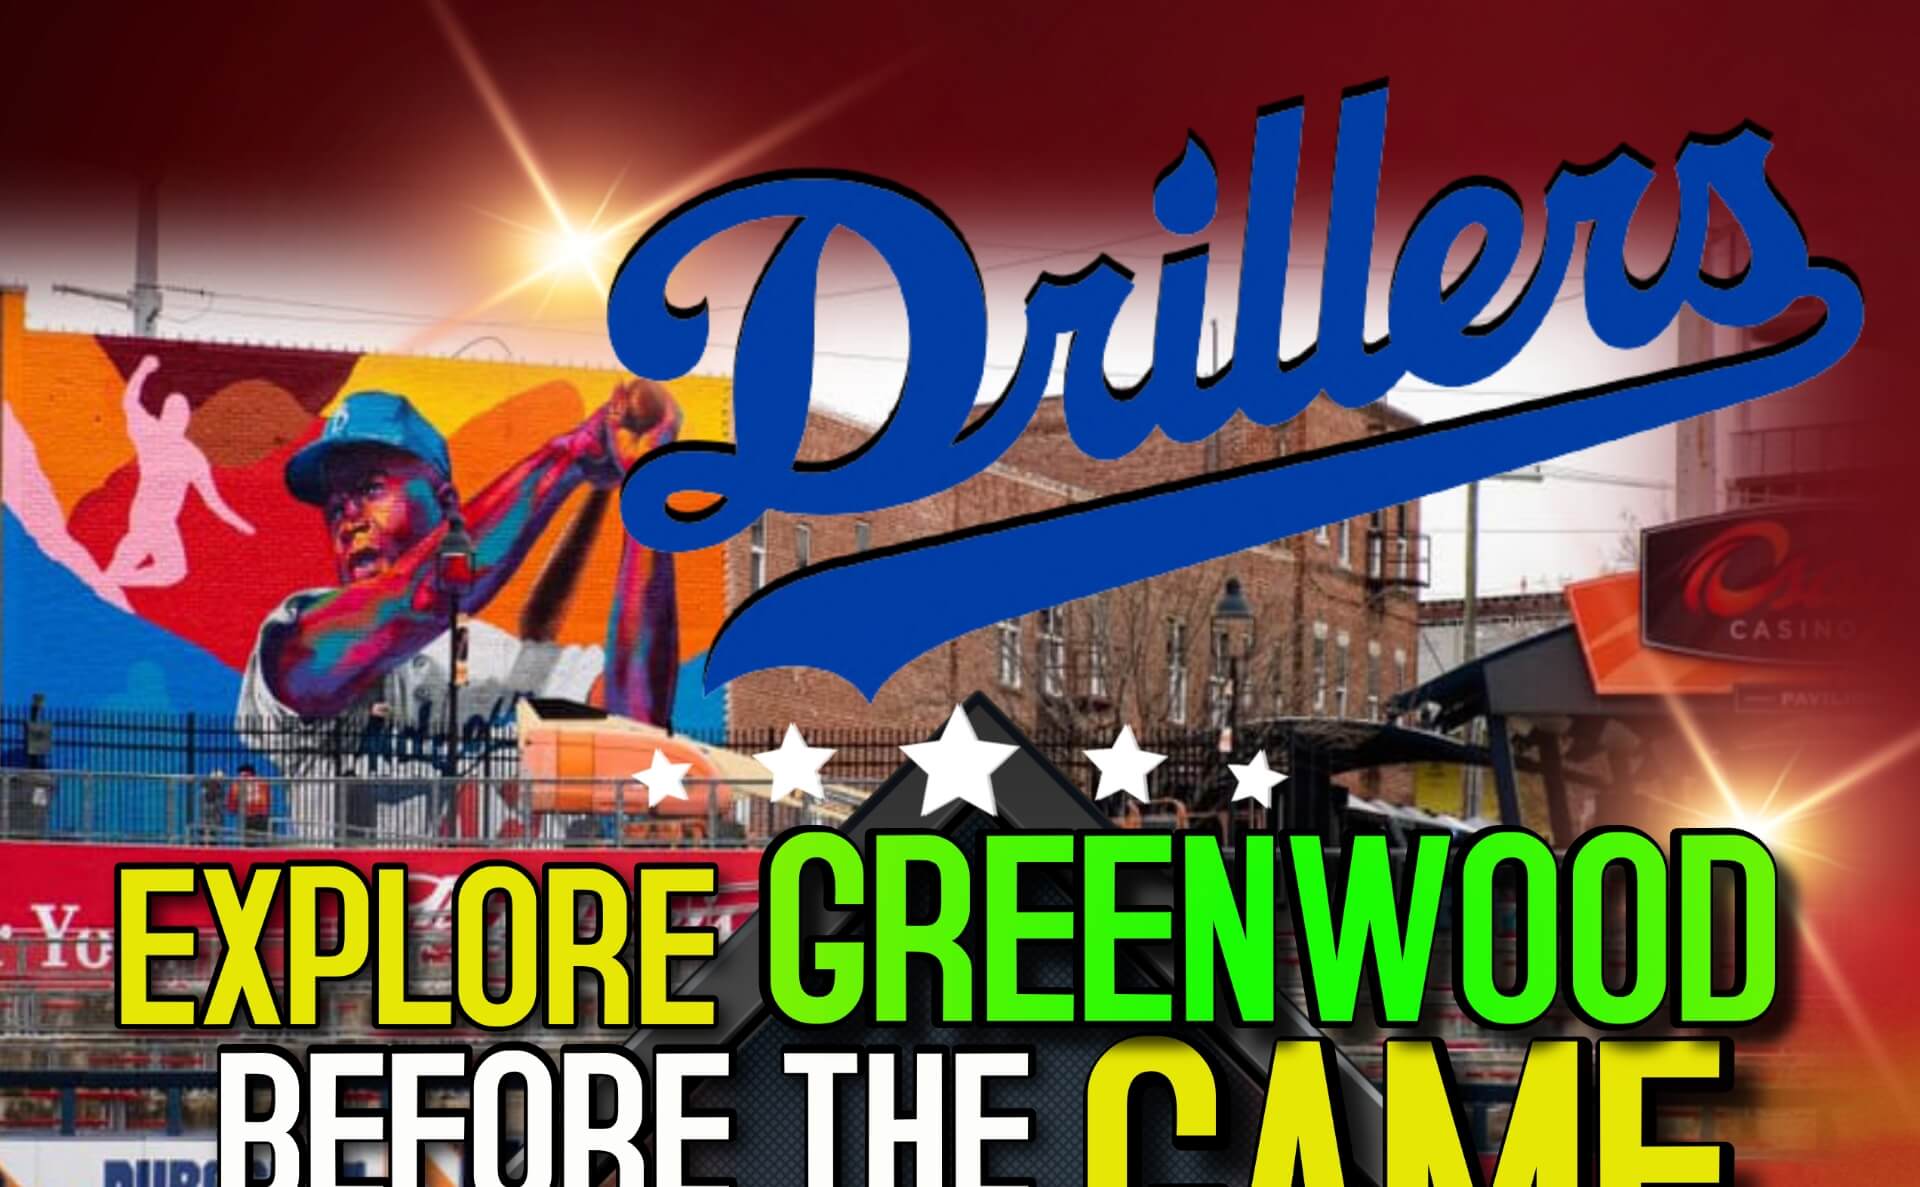 Tulsa Drillers fans come out and enjoy all the rally festivities